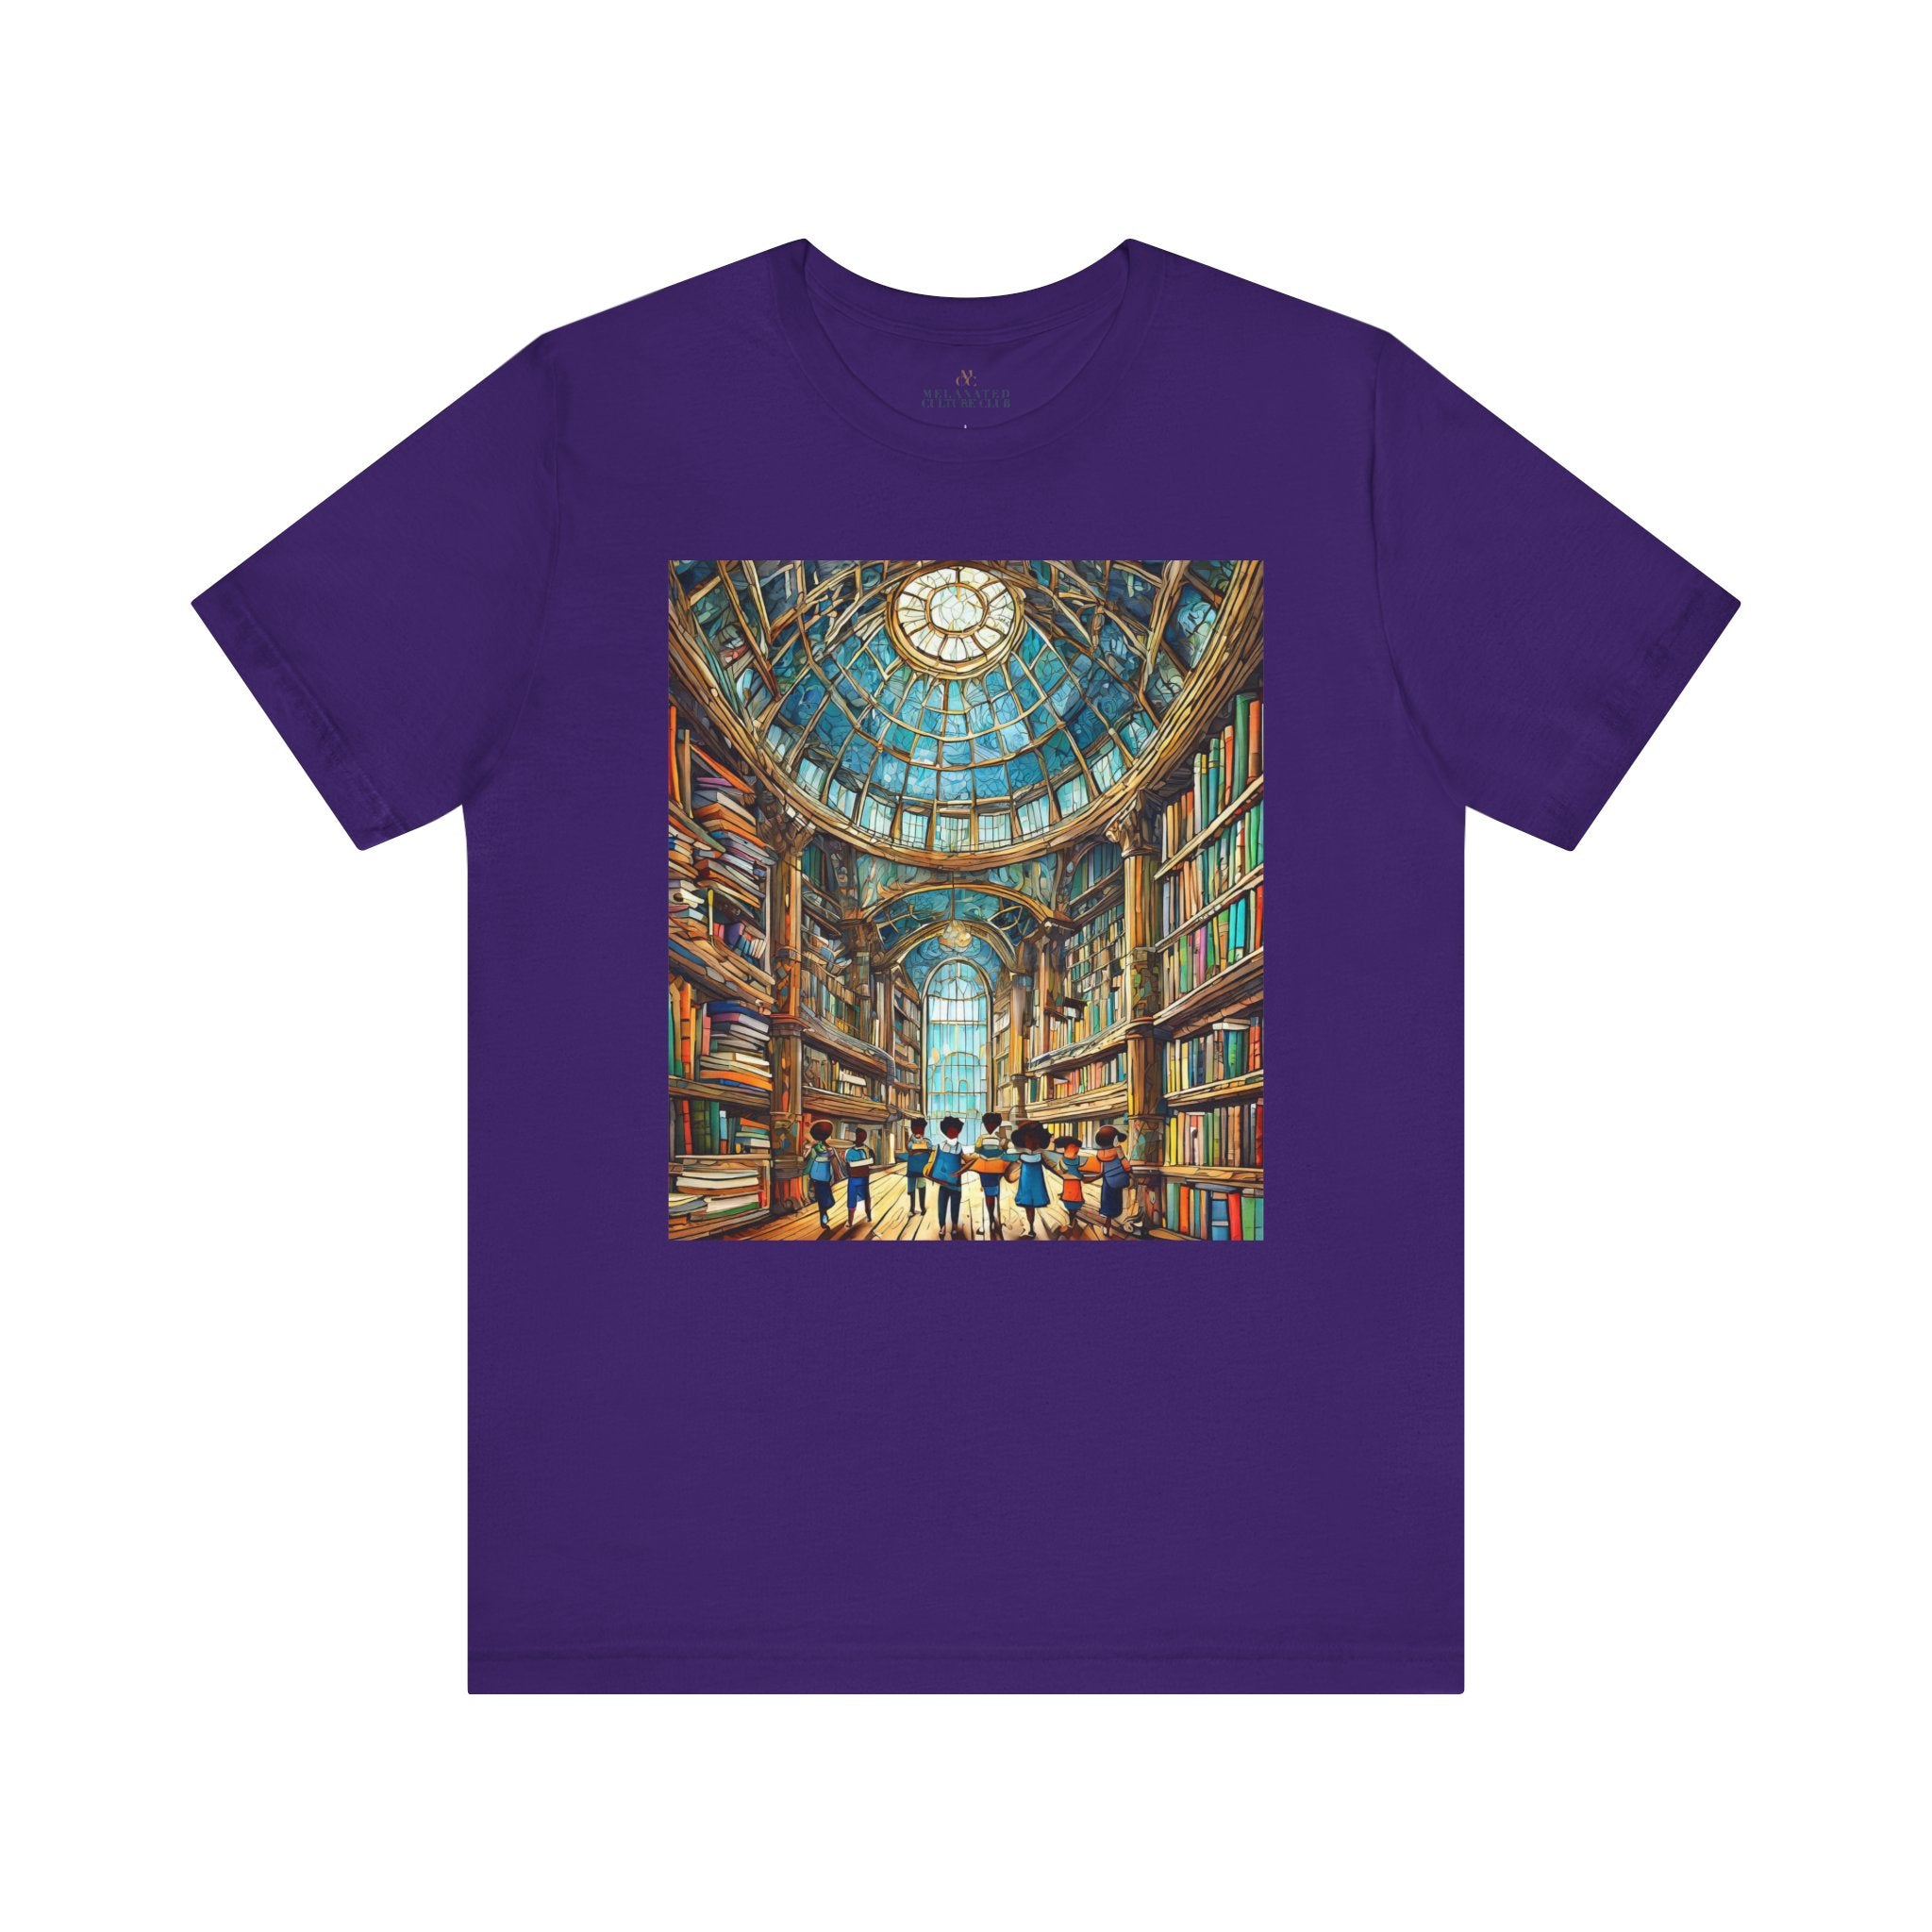 African American Kids at Library Tee shirt in purple.